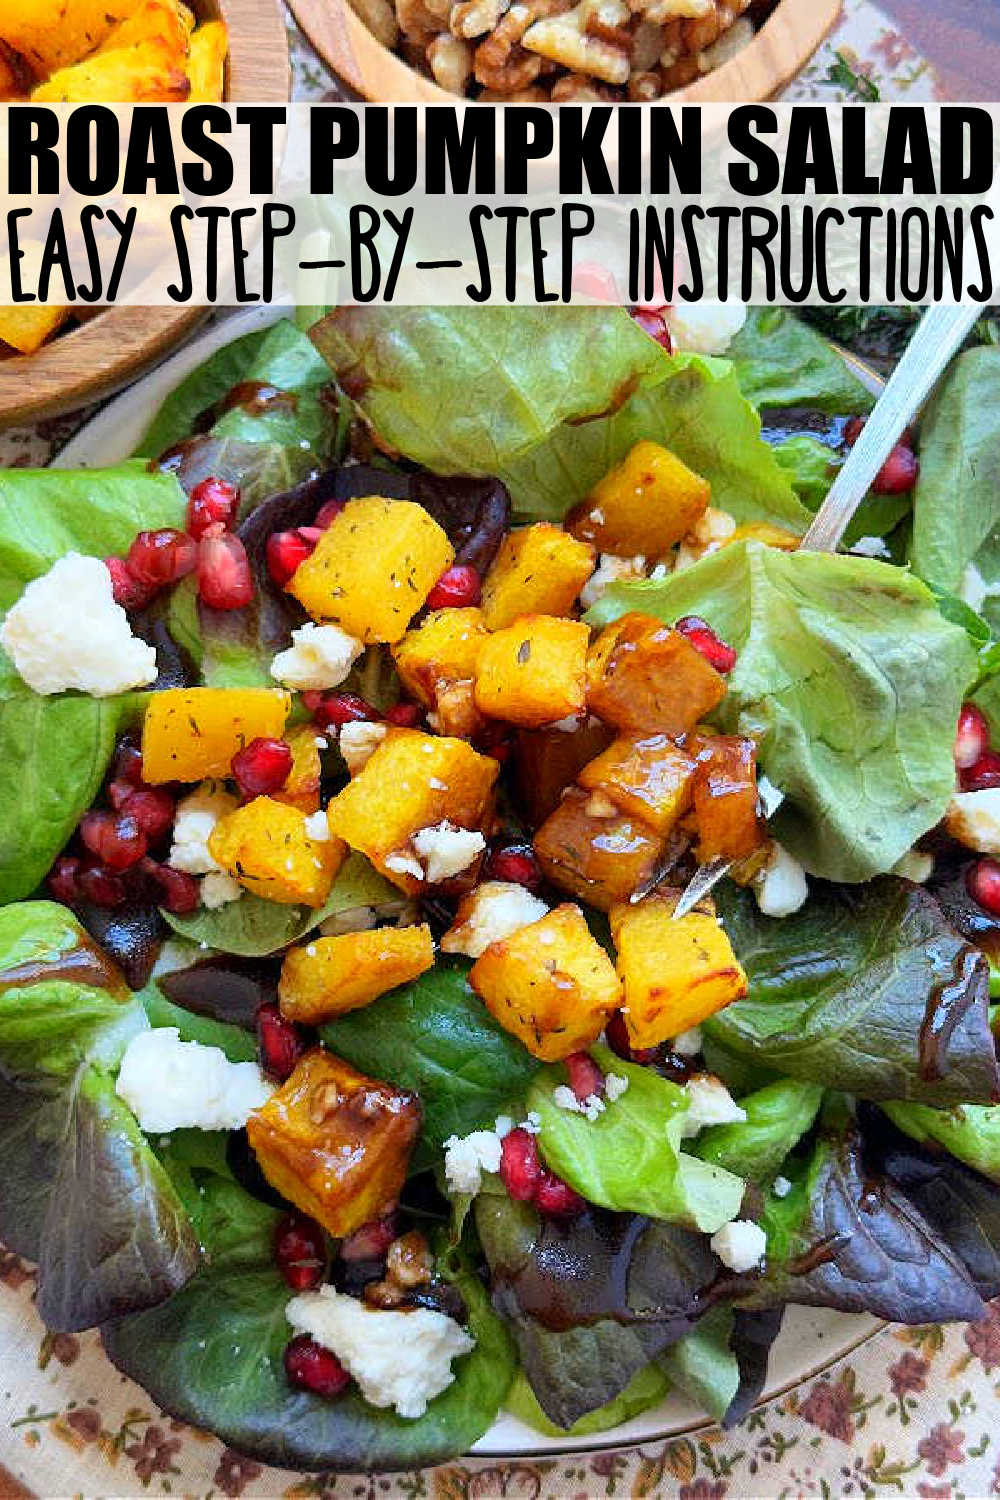 This Roast Pumpkin Salad is a show stopper for your fall dinner table but also so easy to make. The homemade maple balsamic vinaigrette is the best!